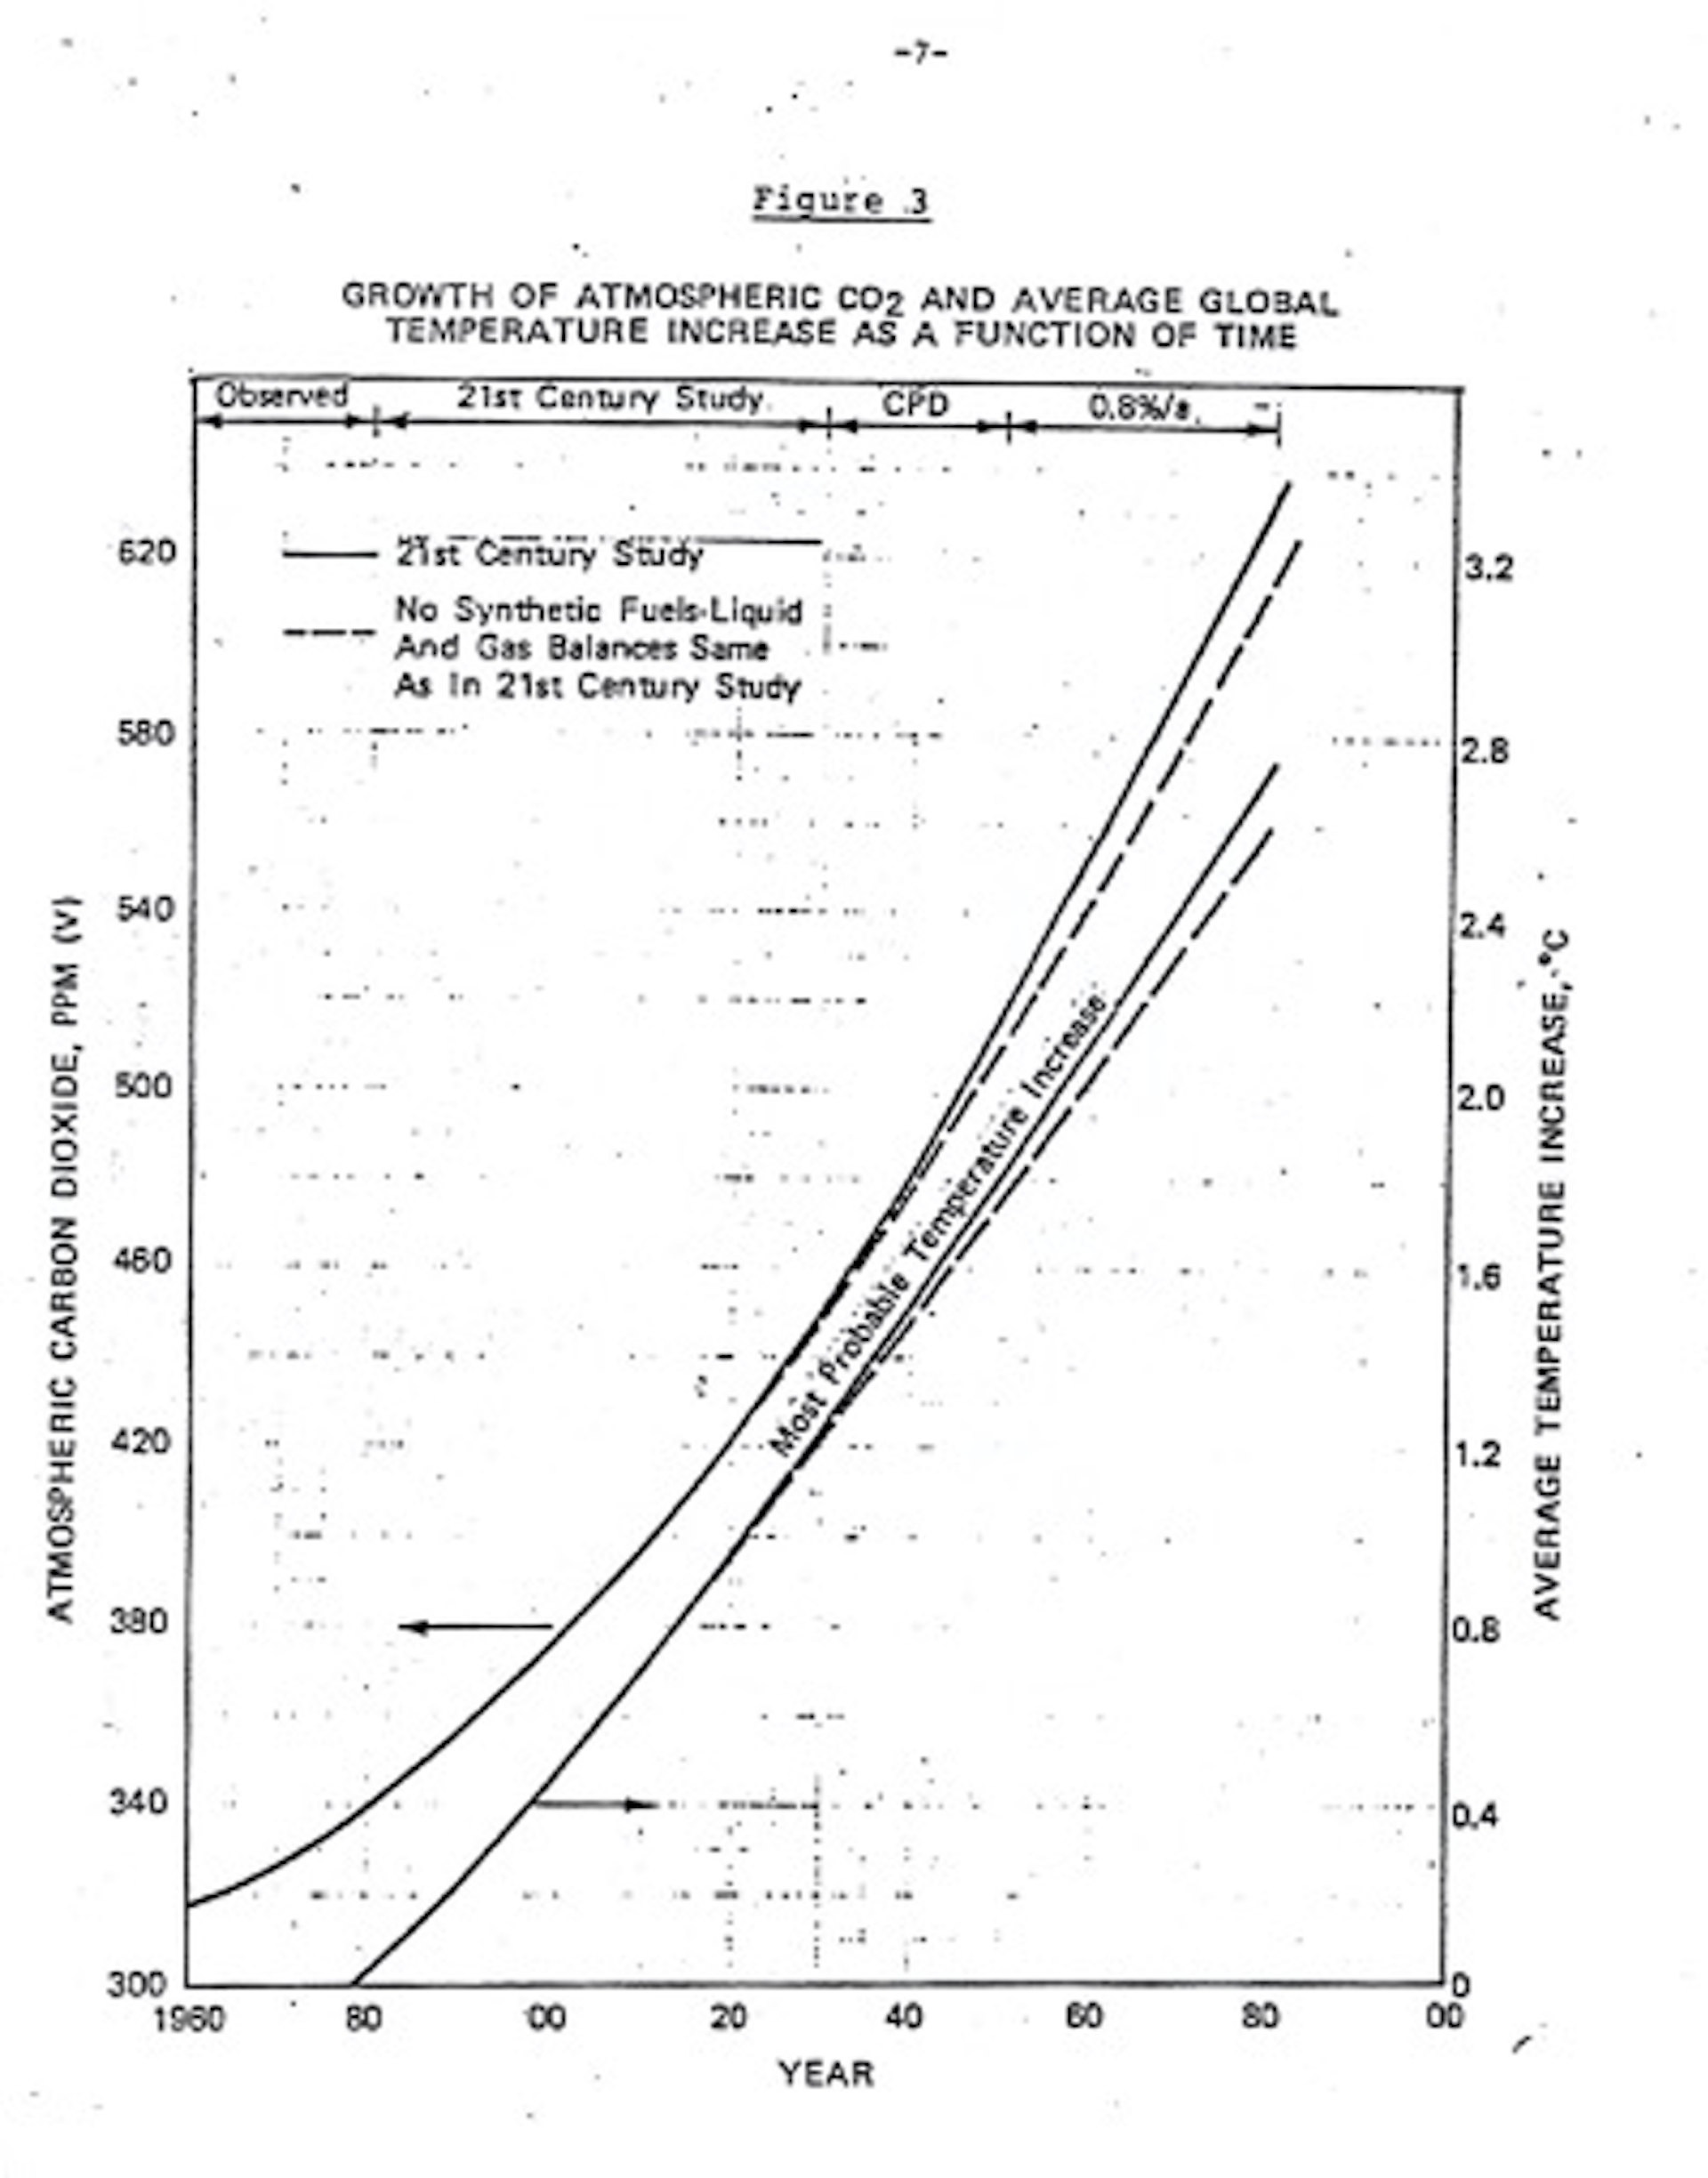 Atmospheric CO2 and temperature change line graph